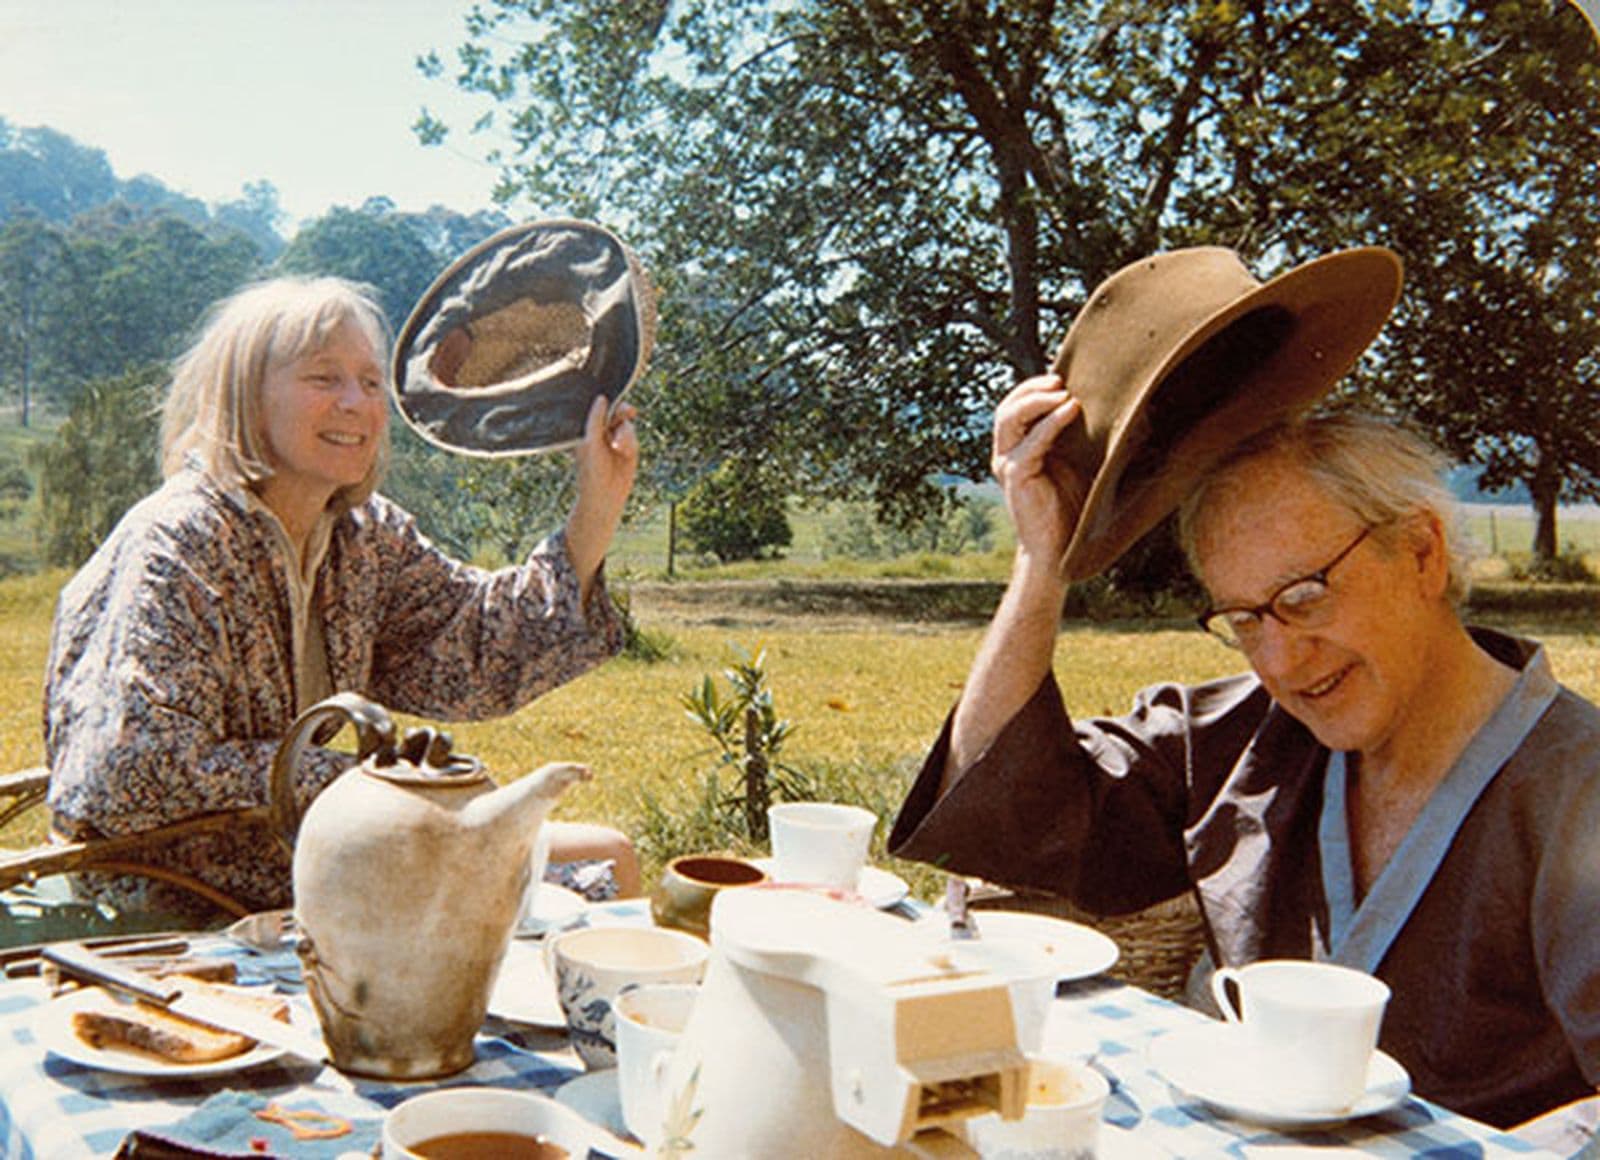 Photograph of two people smiling and waving hats at the picnic